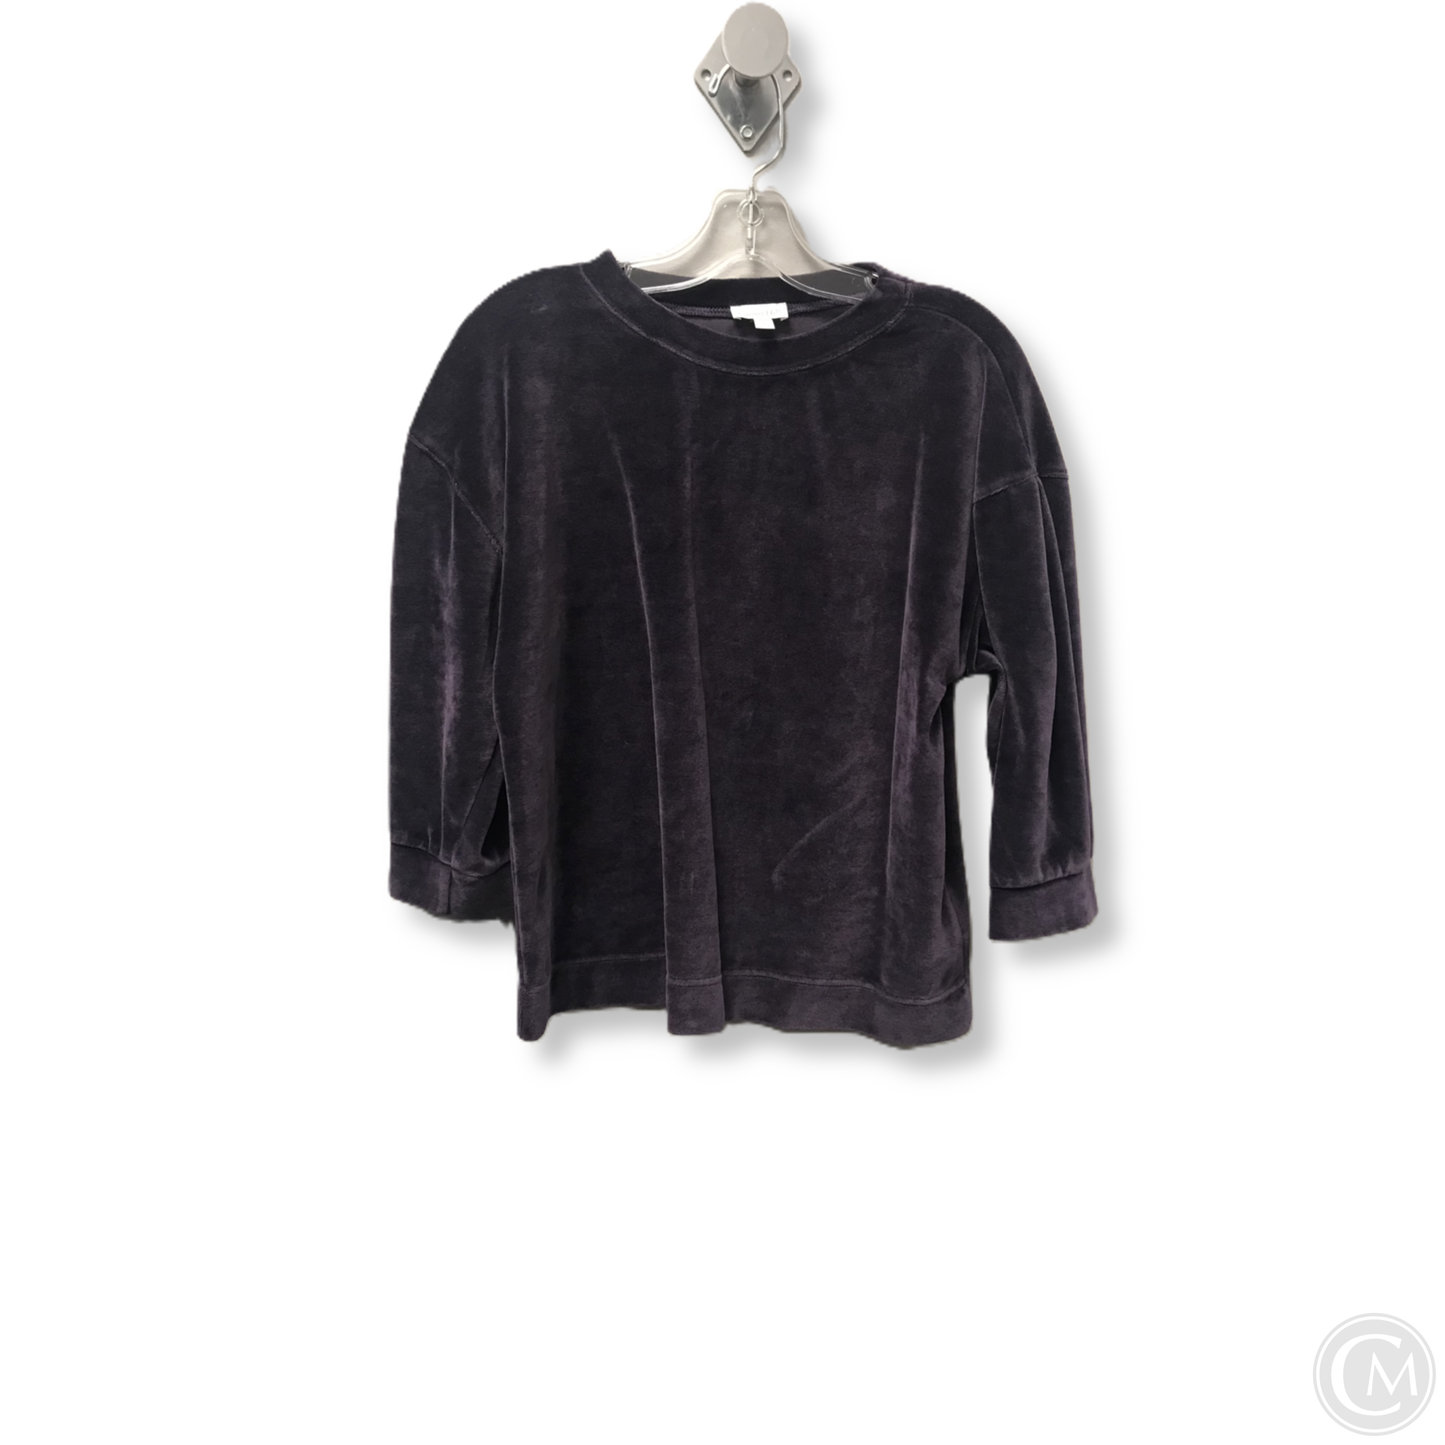 Top 3/4 Sleeve By Garnet Hill  Size: S